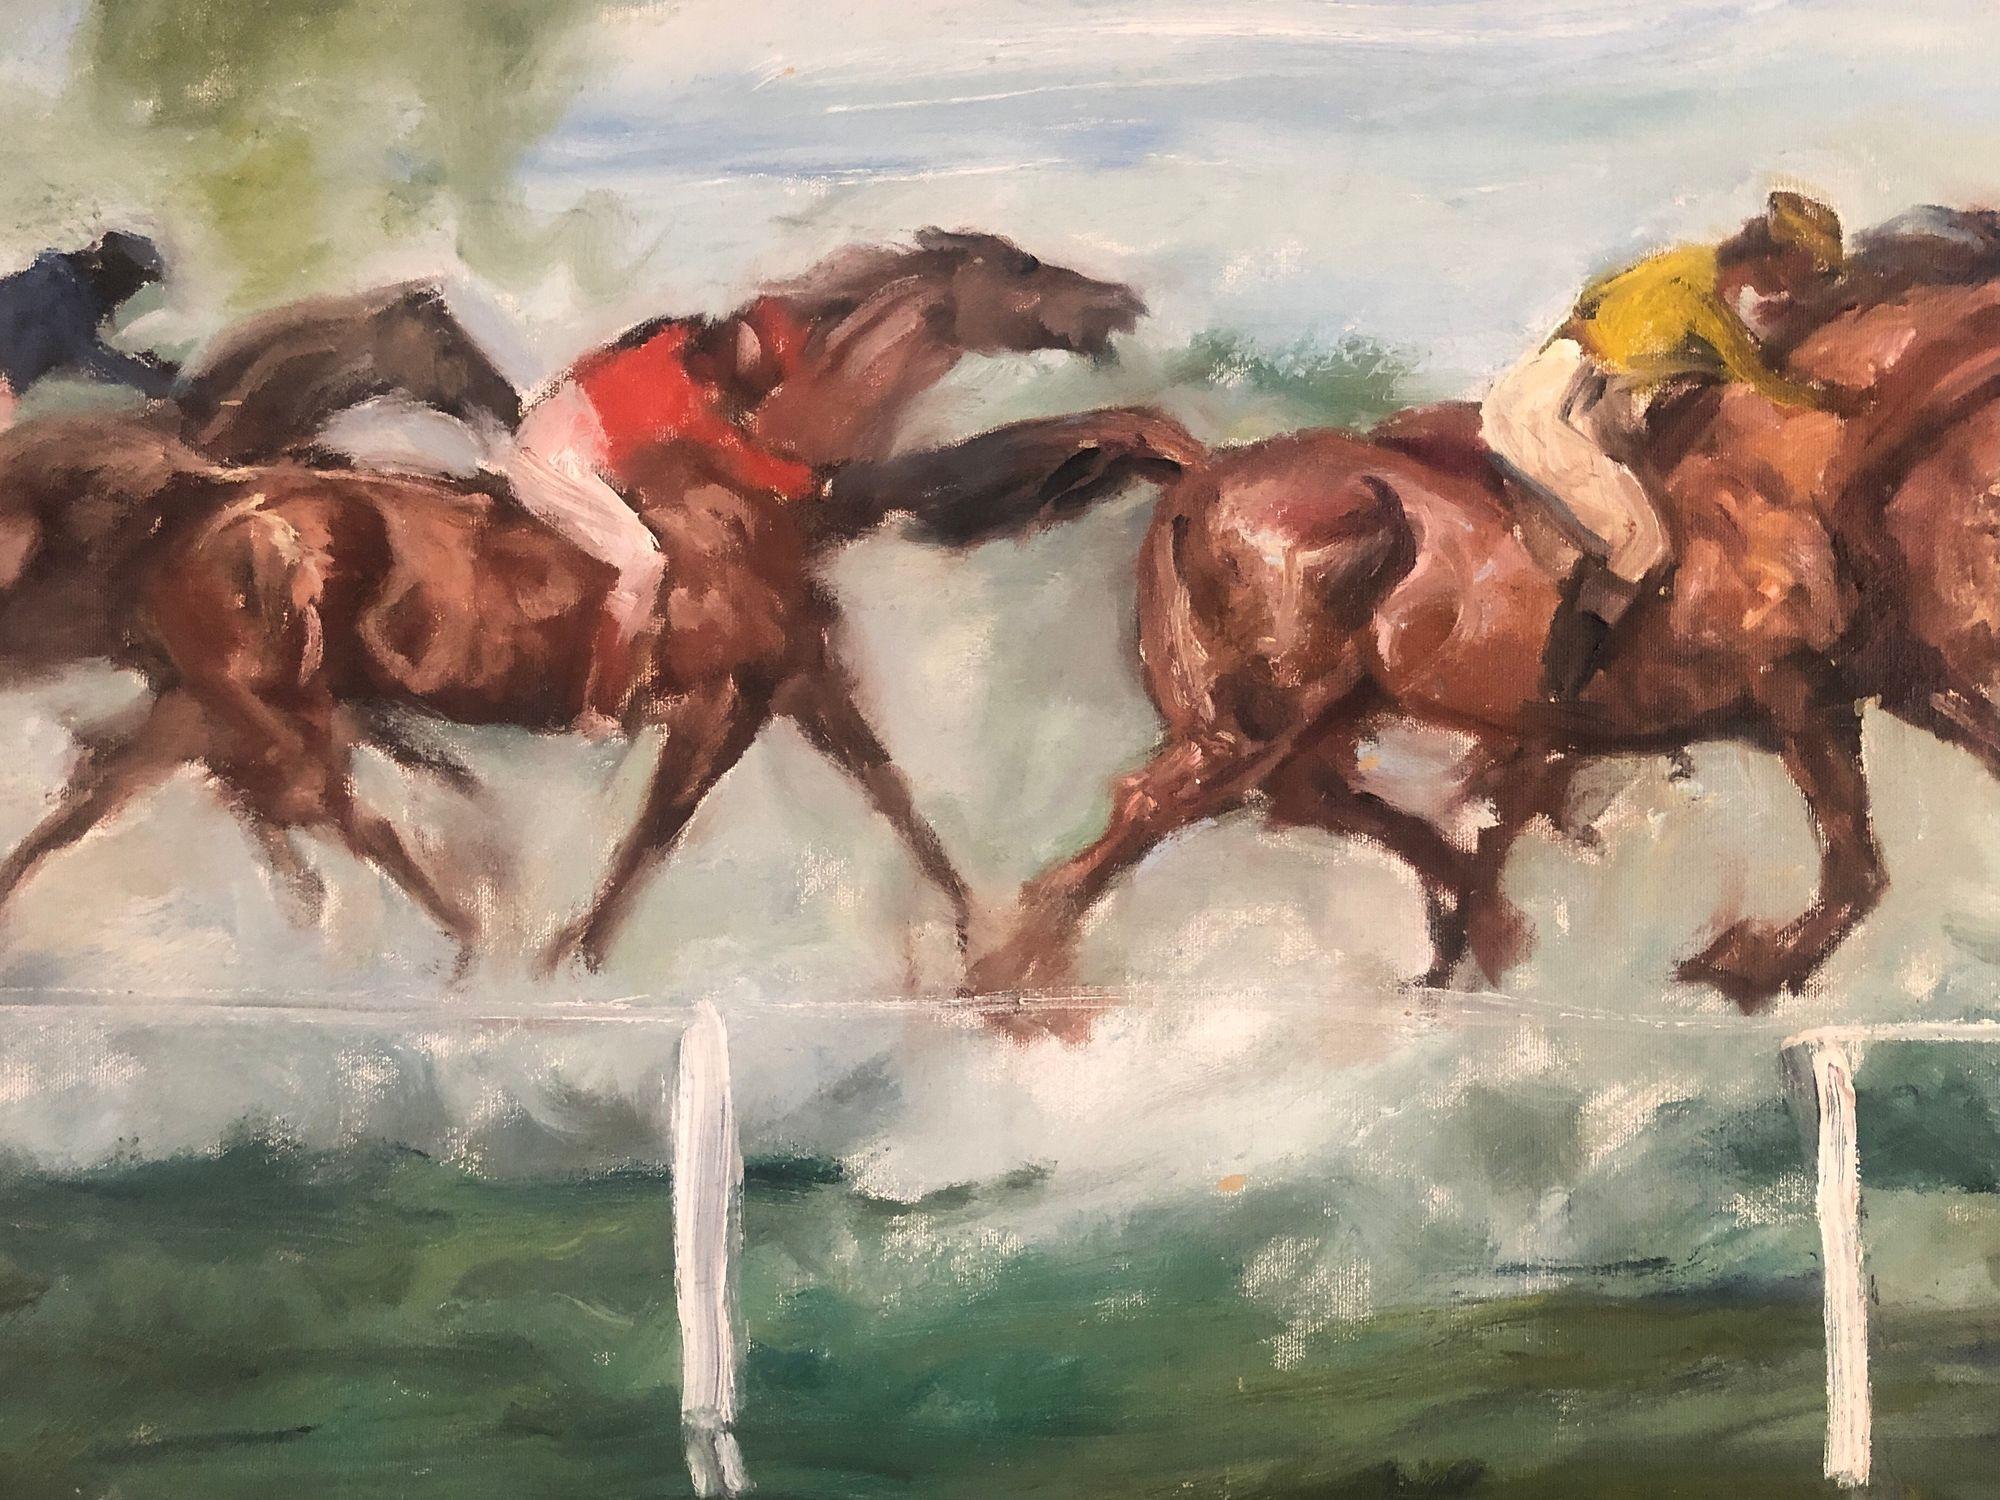 Expressionism Race Horse Racing Scene Framed Oil Painting on Canvas In Excellent Condition For Sale In Van Nuys, CA